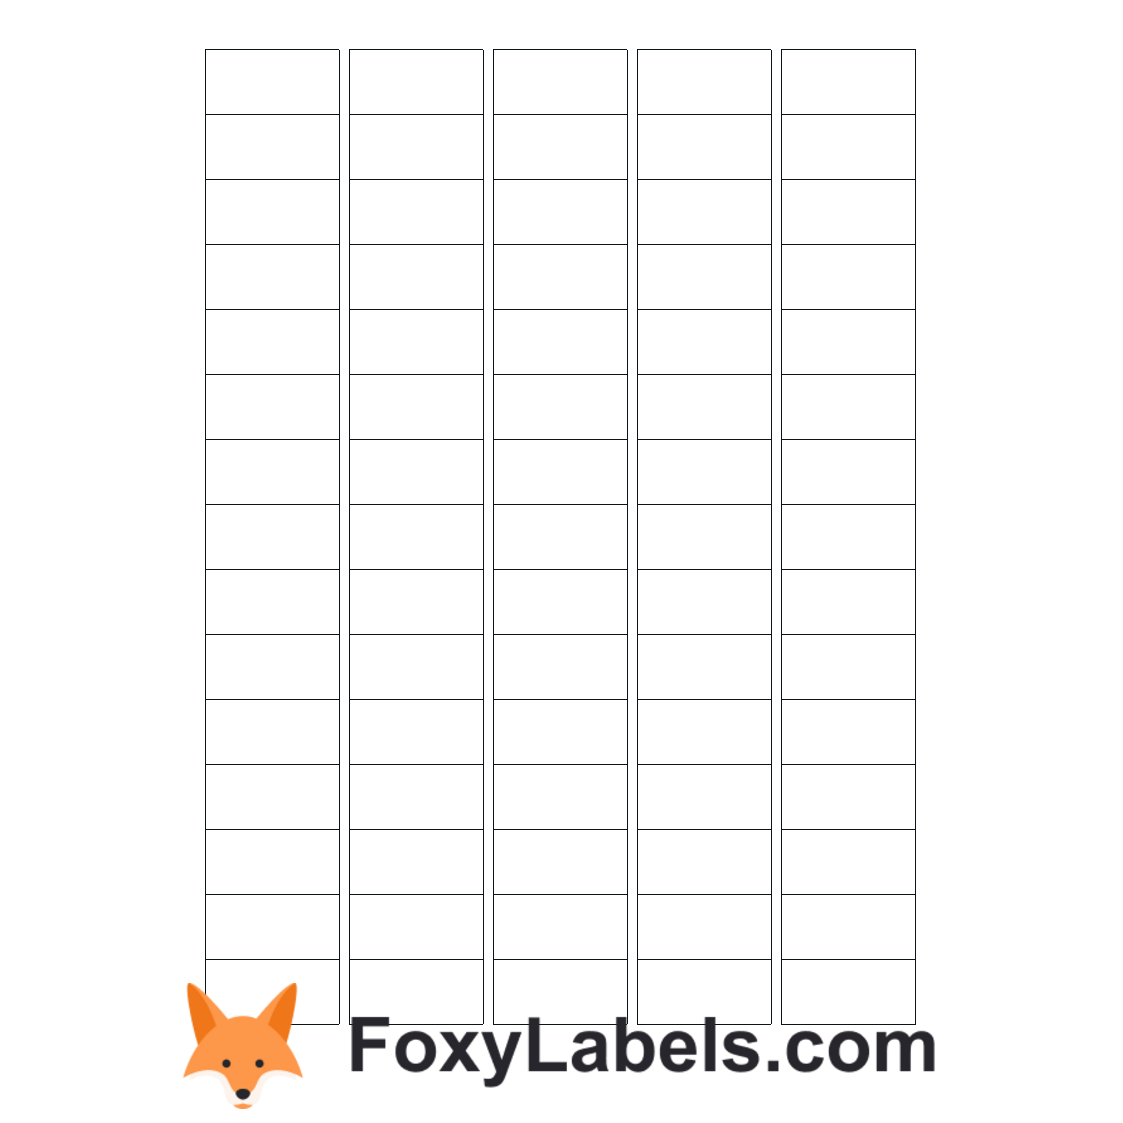 Avery-Zweckform L7632 label template for Google Docs